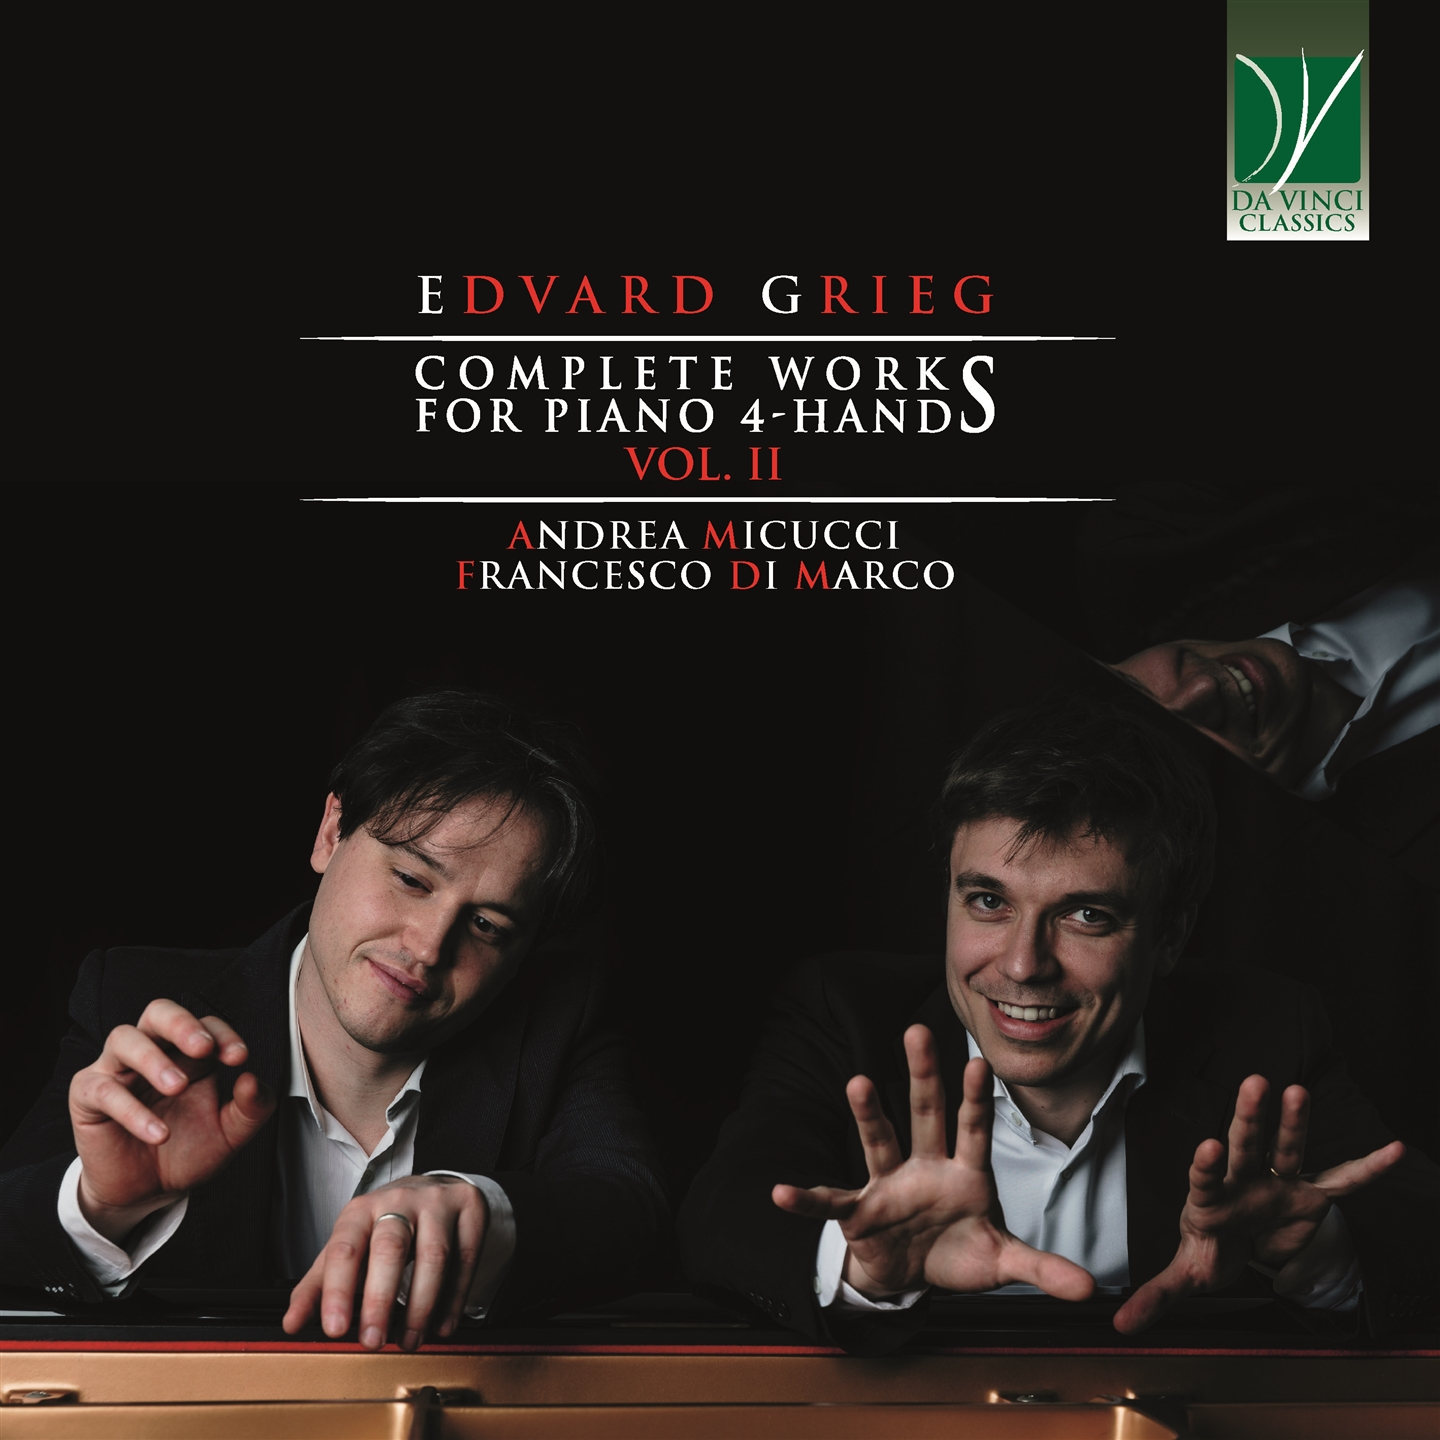 EDVARD GRIEG: COMPLETE WORKS FOR FOR PIANOS 4-HANDS VOL. 2